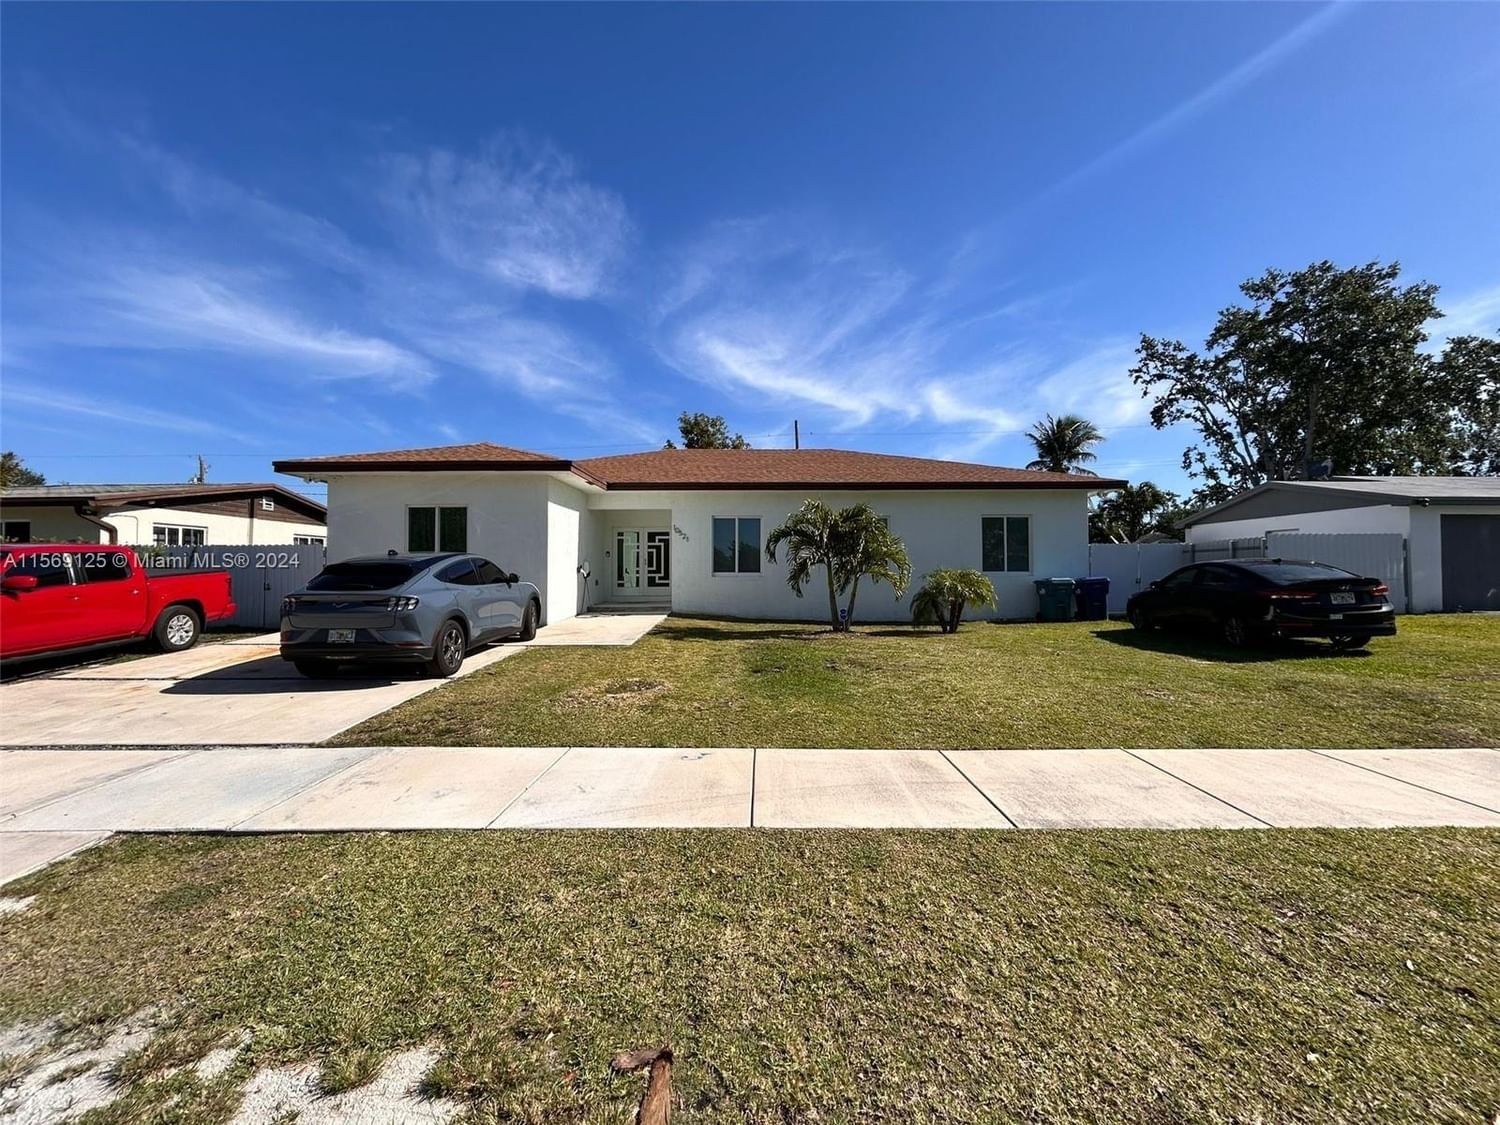 Real estate property located at 10521 204th Ter, Miami-Dade County, BENSON MANOR, Cutler Bay, FL